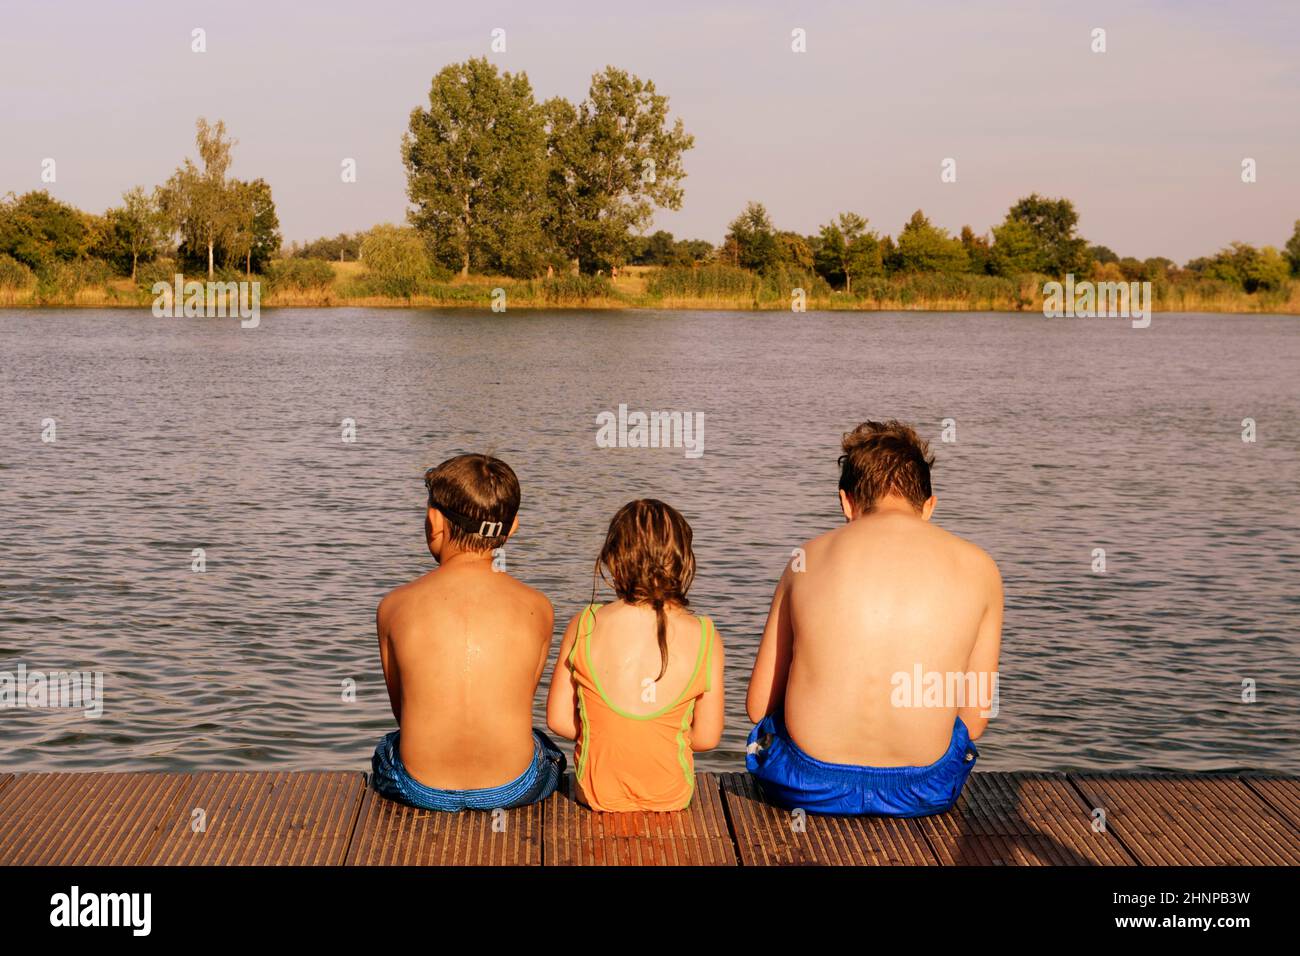 Children sitting on pier. Three children of different age - teenager boy, elementary age boy and preschool girl sitting on a wooden pier. Summer and childhood concept. Children on bench at the lake Stock Photo